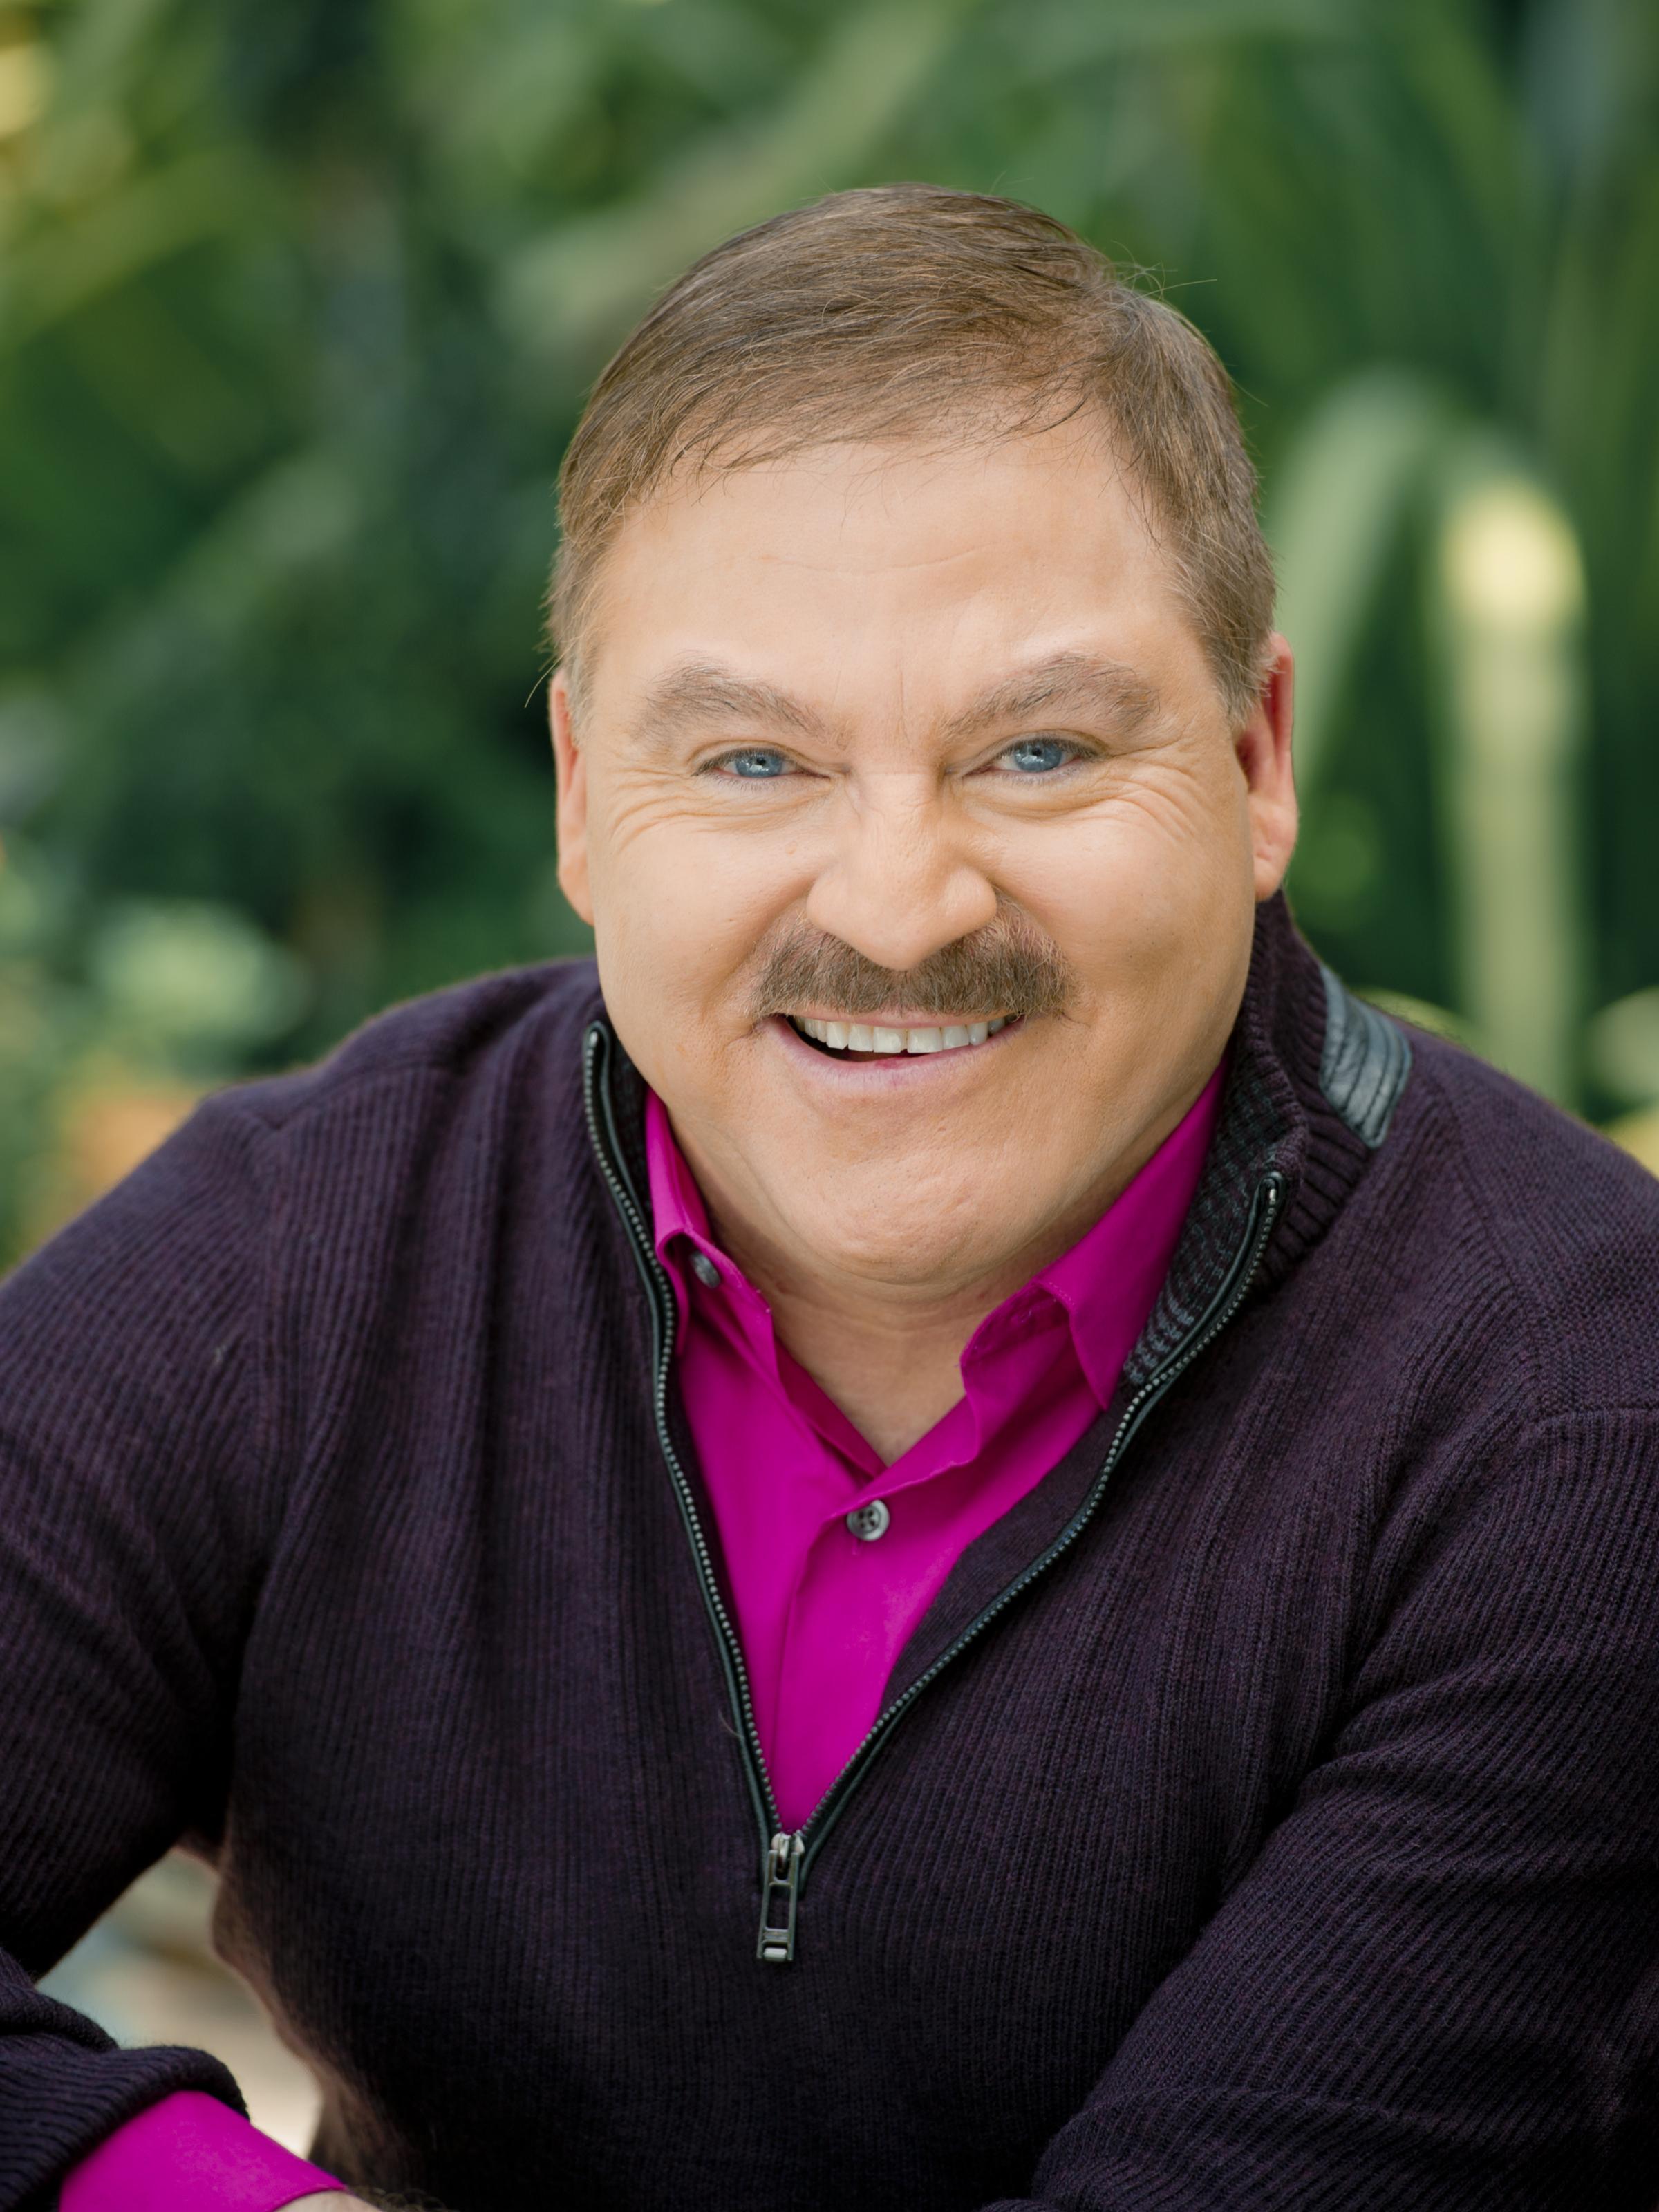 Fire it up with CJ! Soul Academy with James Van Praagh. Call 800930